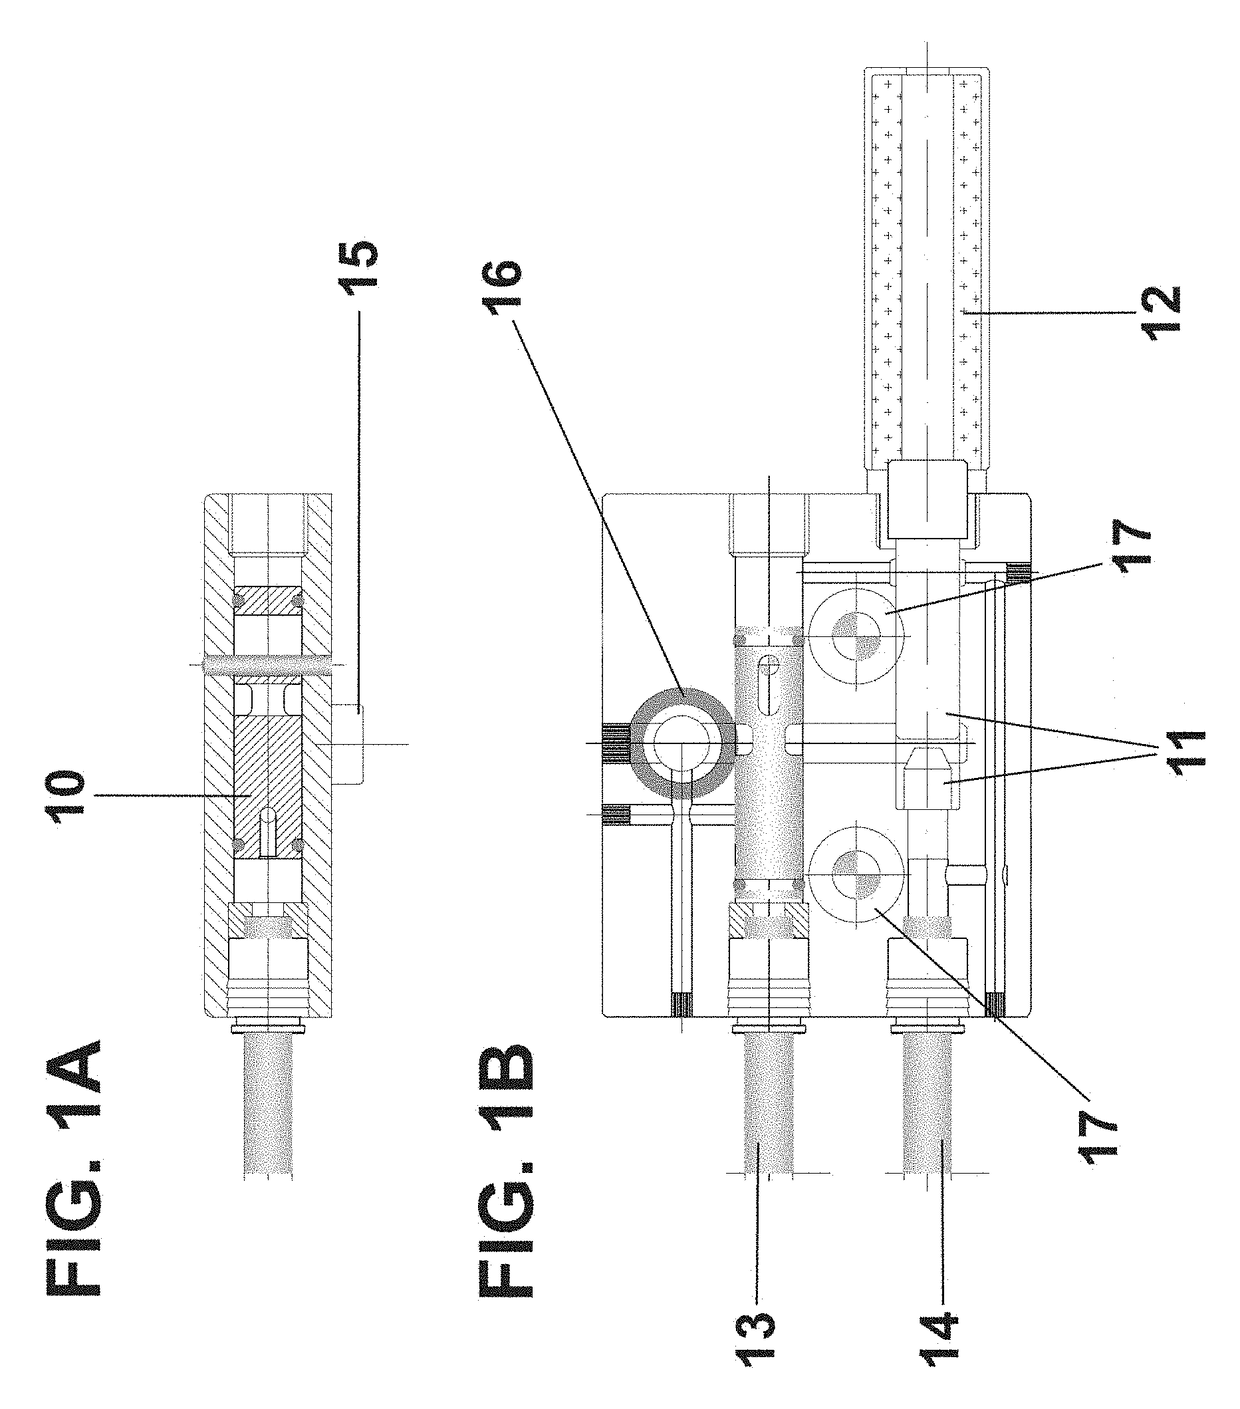 Device and method for the suction of air in injection molds and the subsequent expulsion of molded pieces